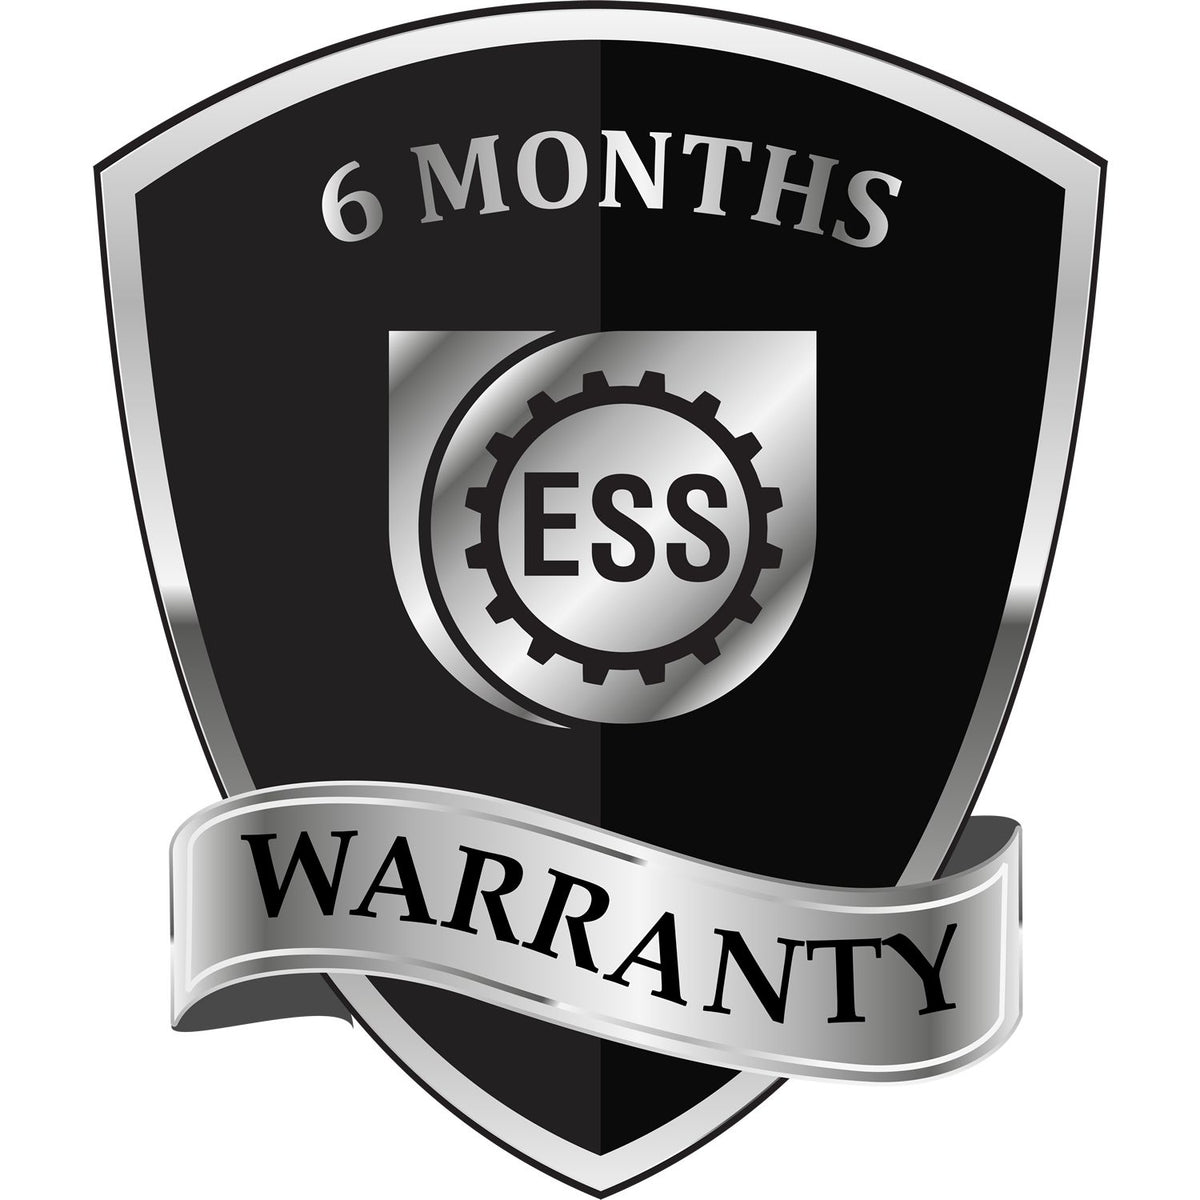 A badge or emblem showing a warranty icon for the Self-Inking Alabama PE Stamp